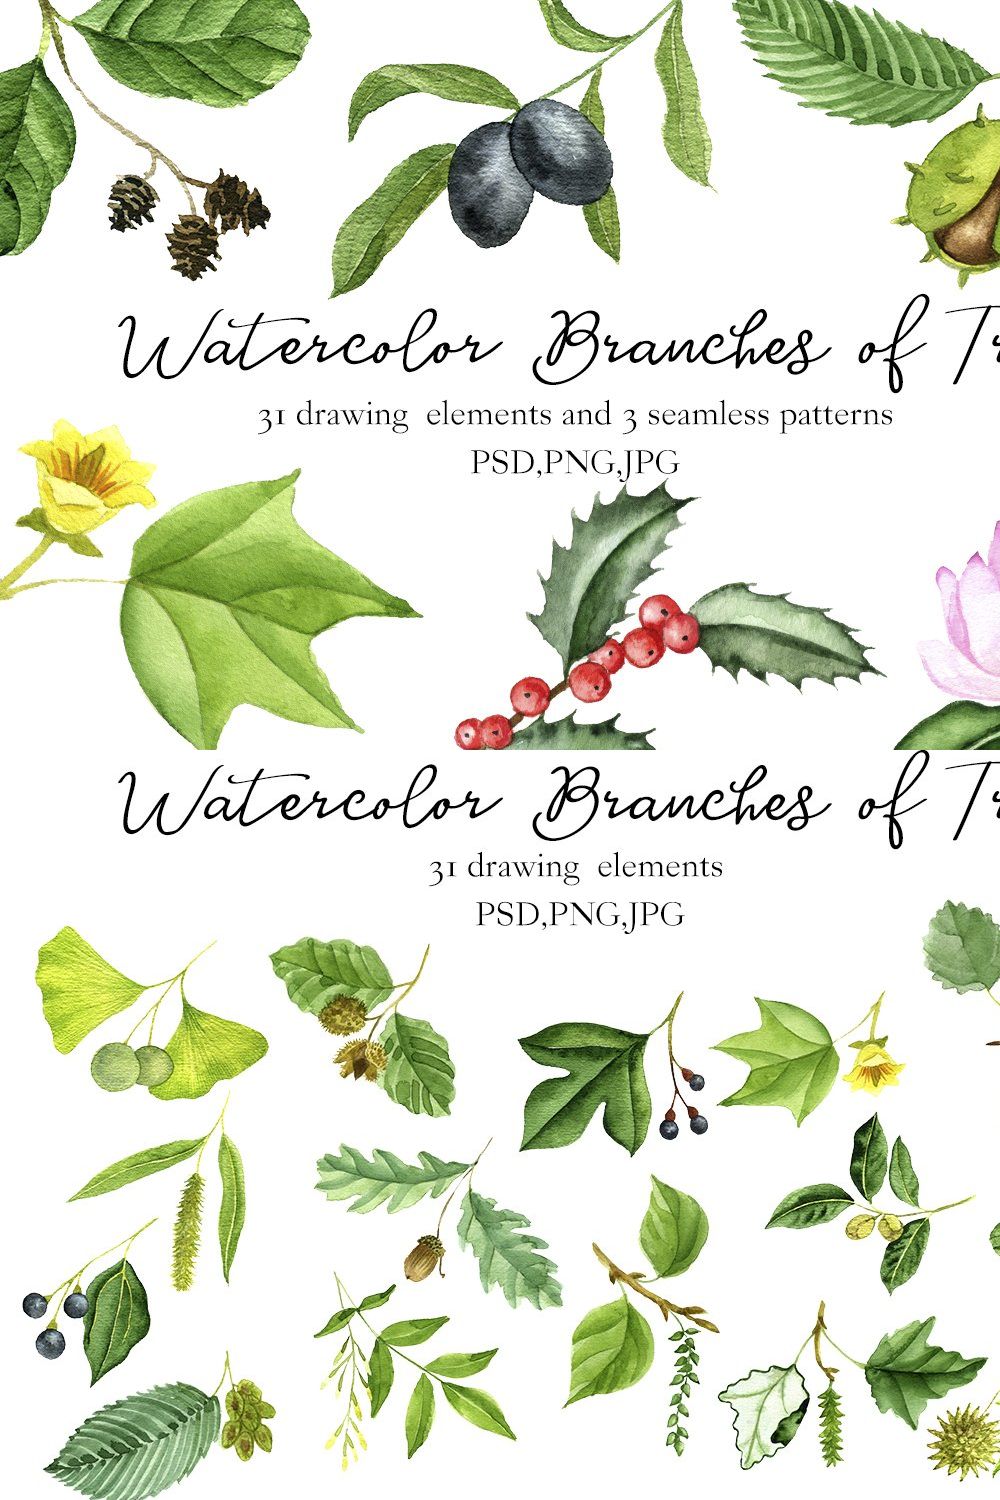 Watercolor Branches of Trees pinterest preview image.